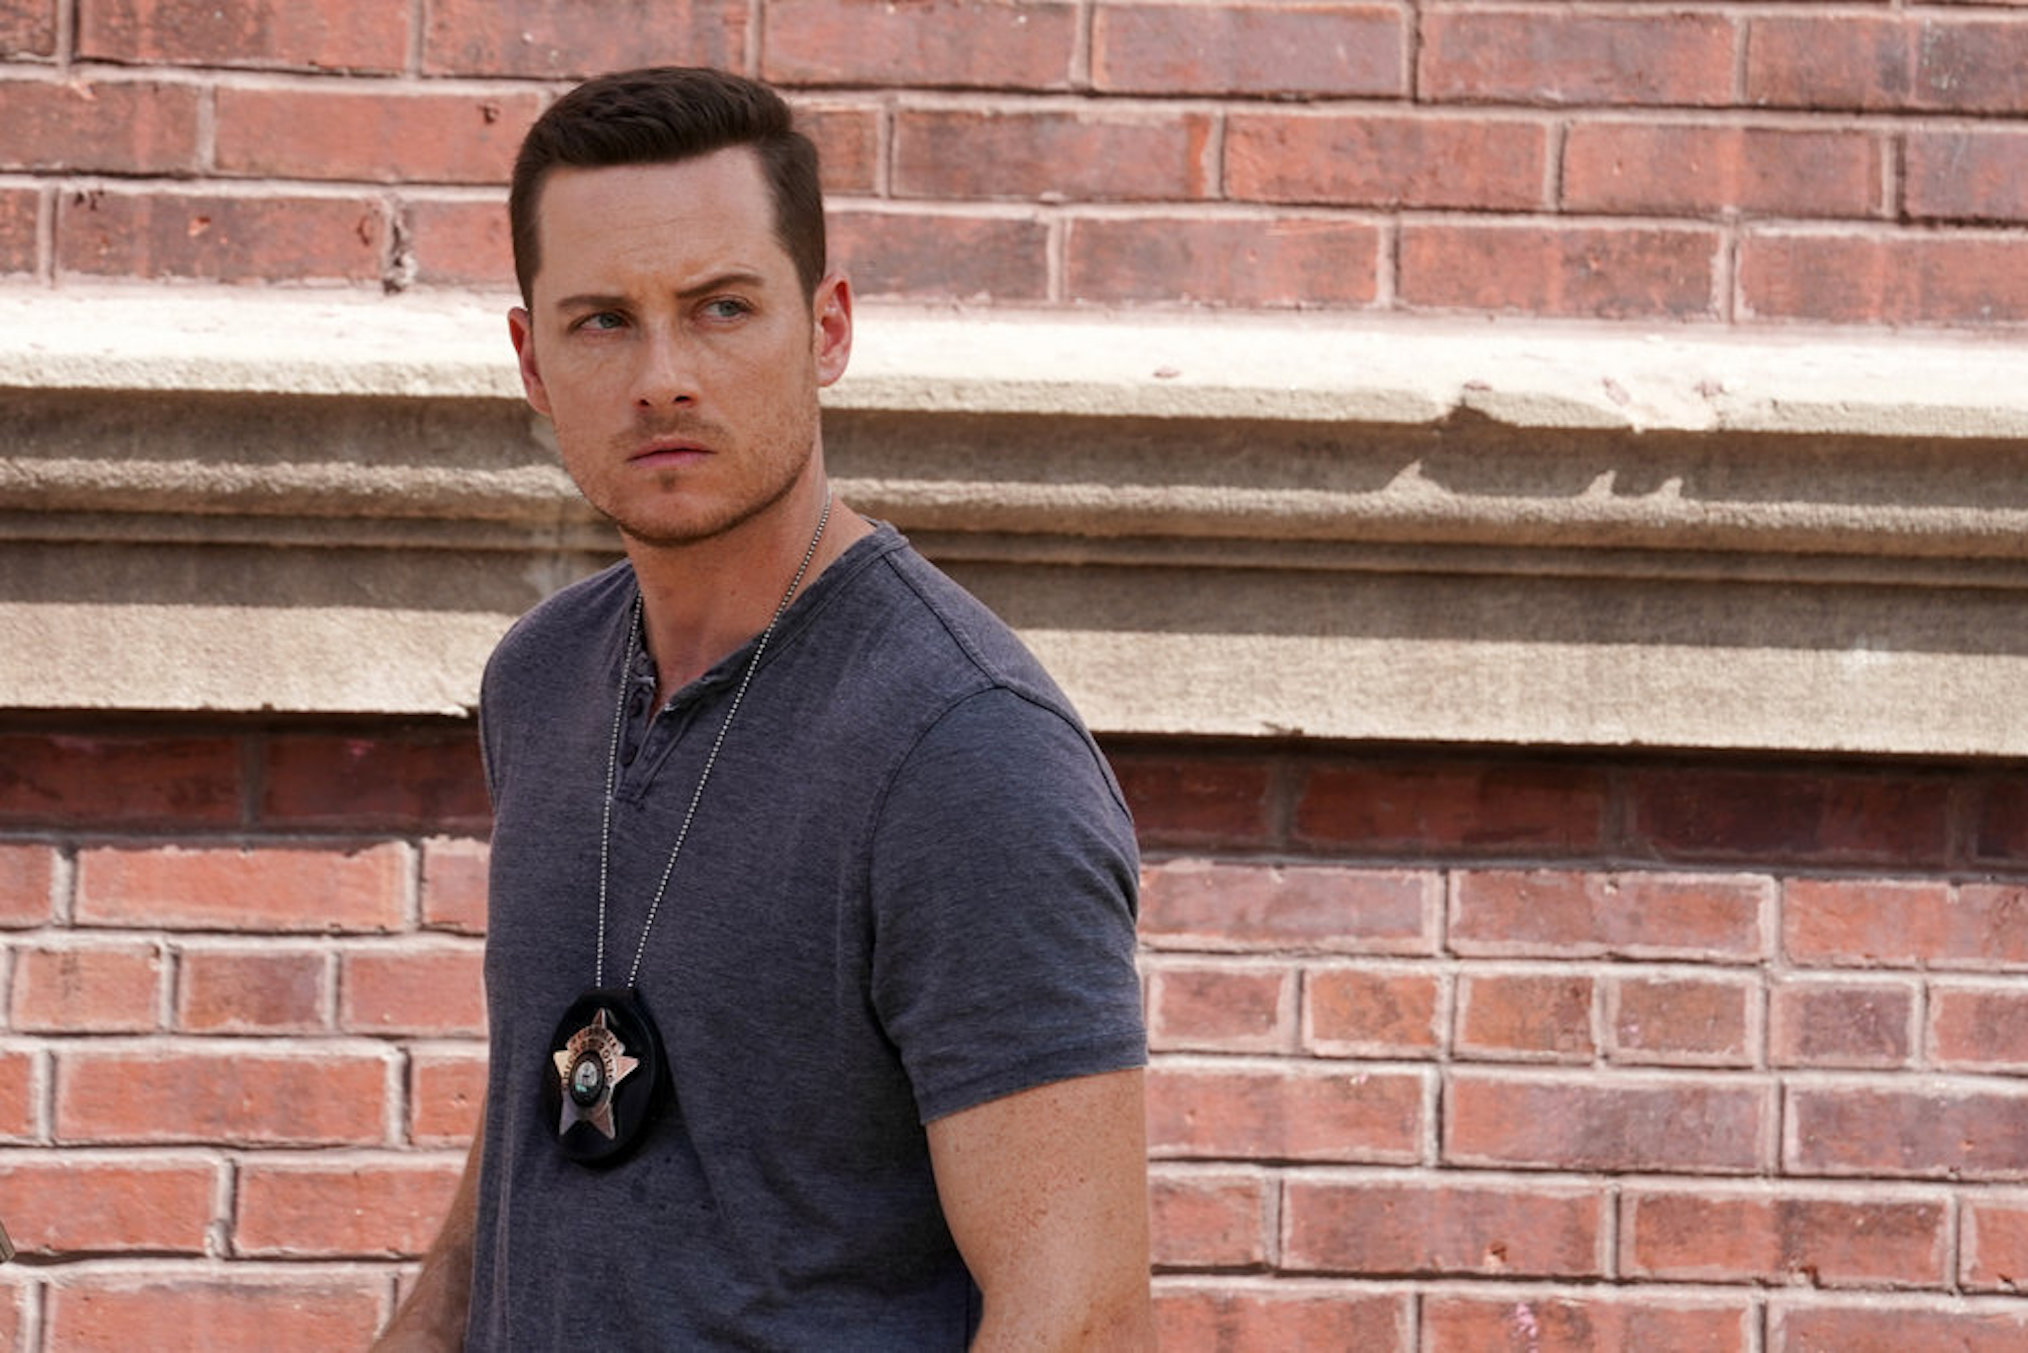 Jesse Lee Soffer as Jay Halstead in Chicago PD